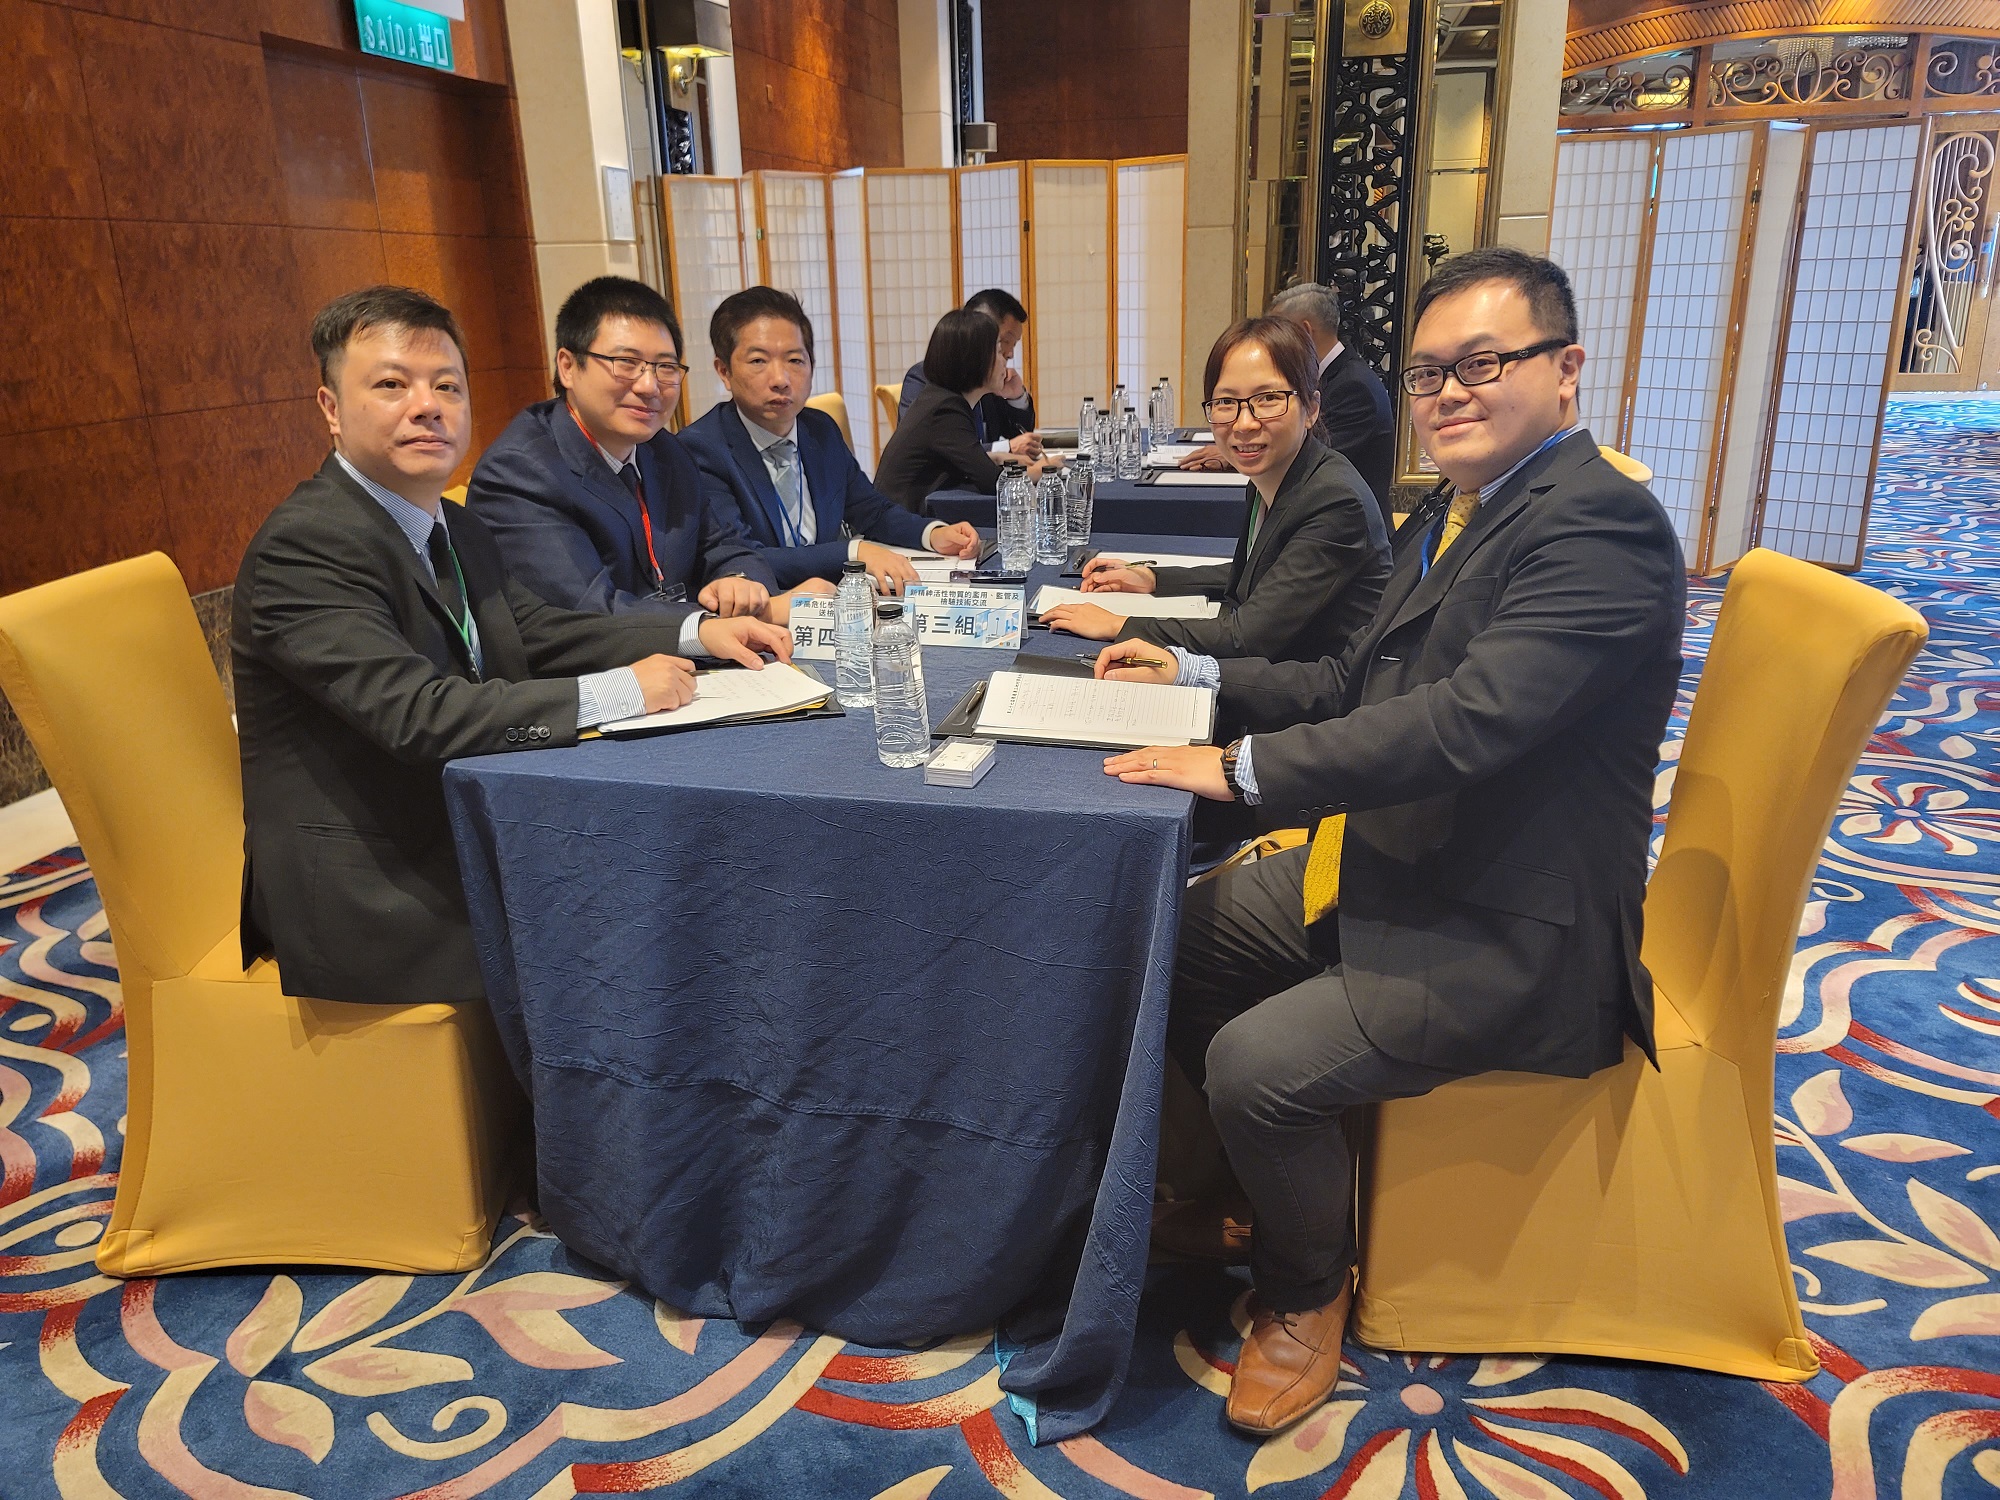 Forensic Experts from Guangdong, Hong Kong and Macao participated in group discussions to share technology and information